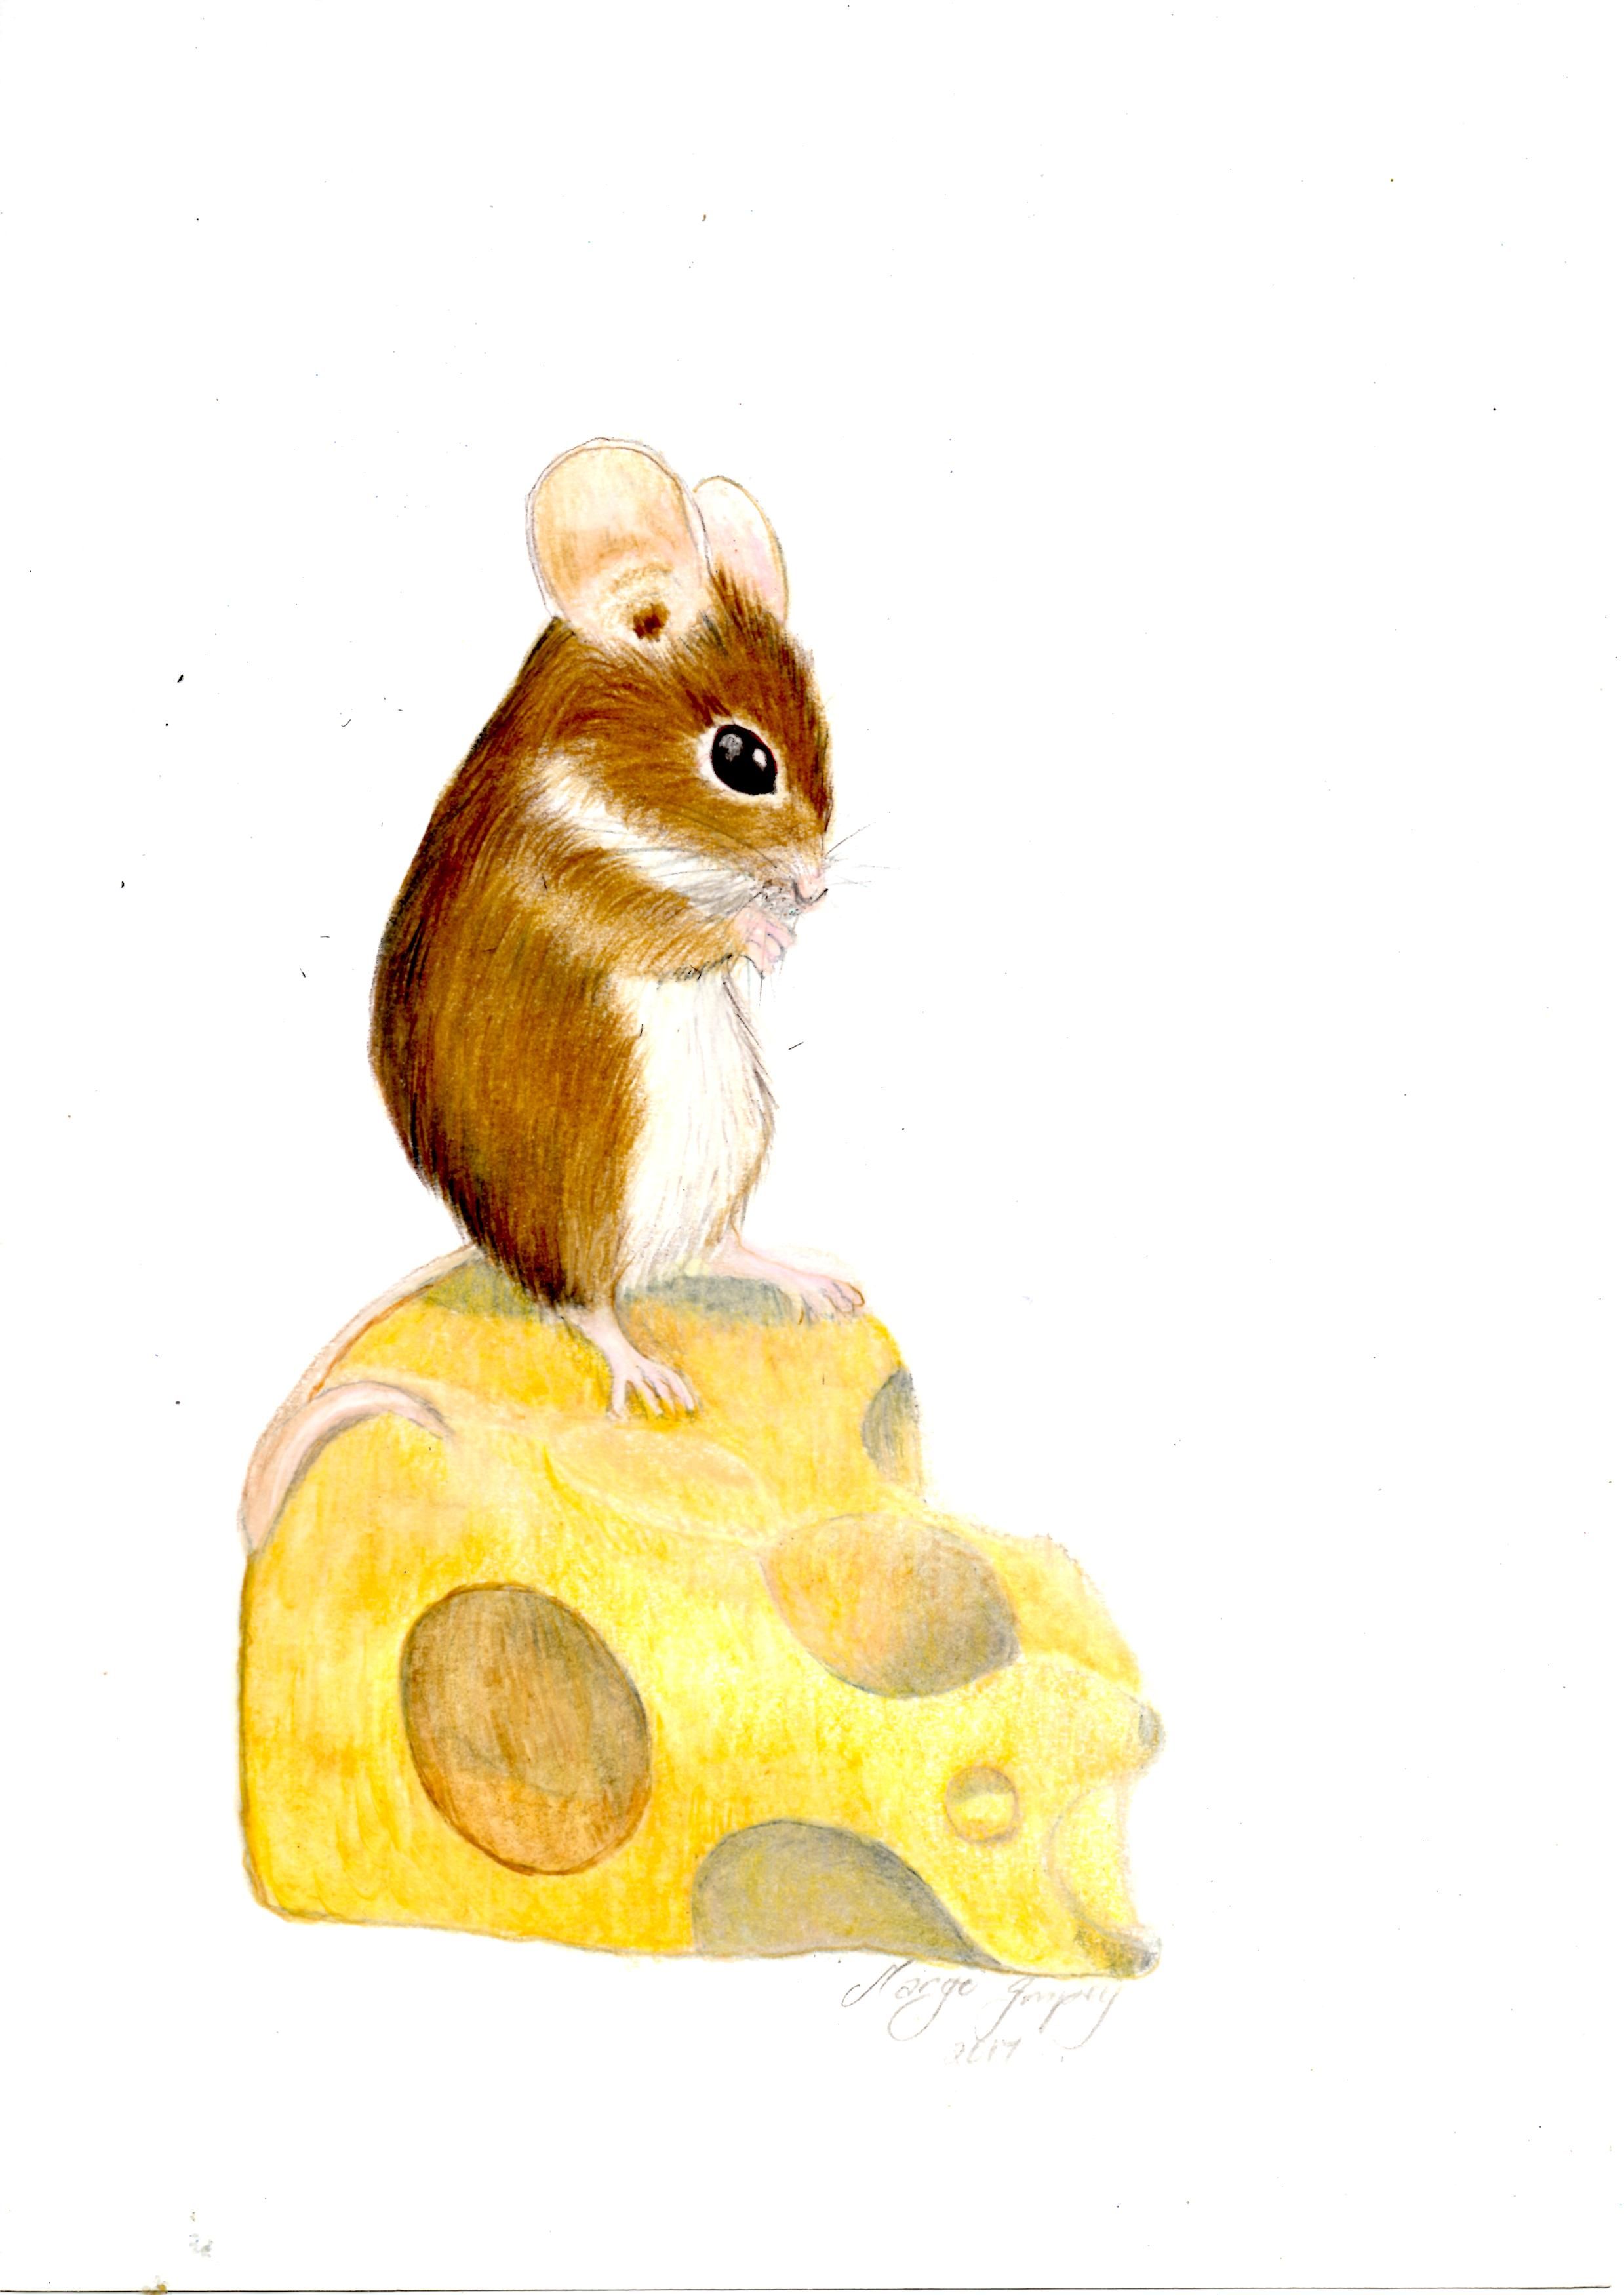 Mouse On Cheese And Rainbow Art Wallpapers